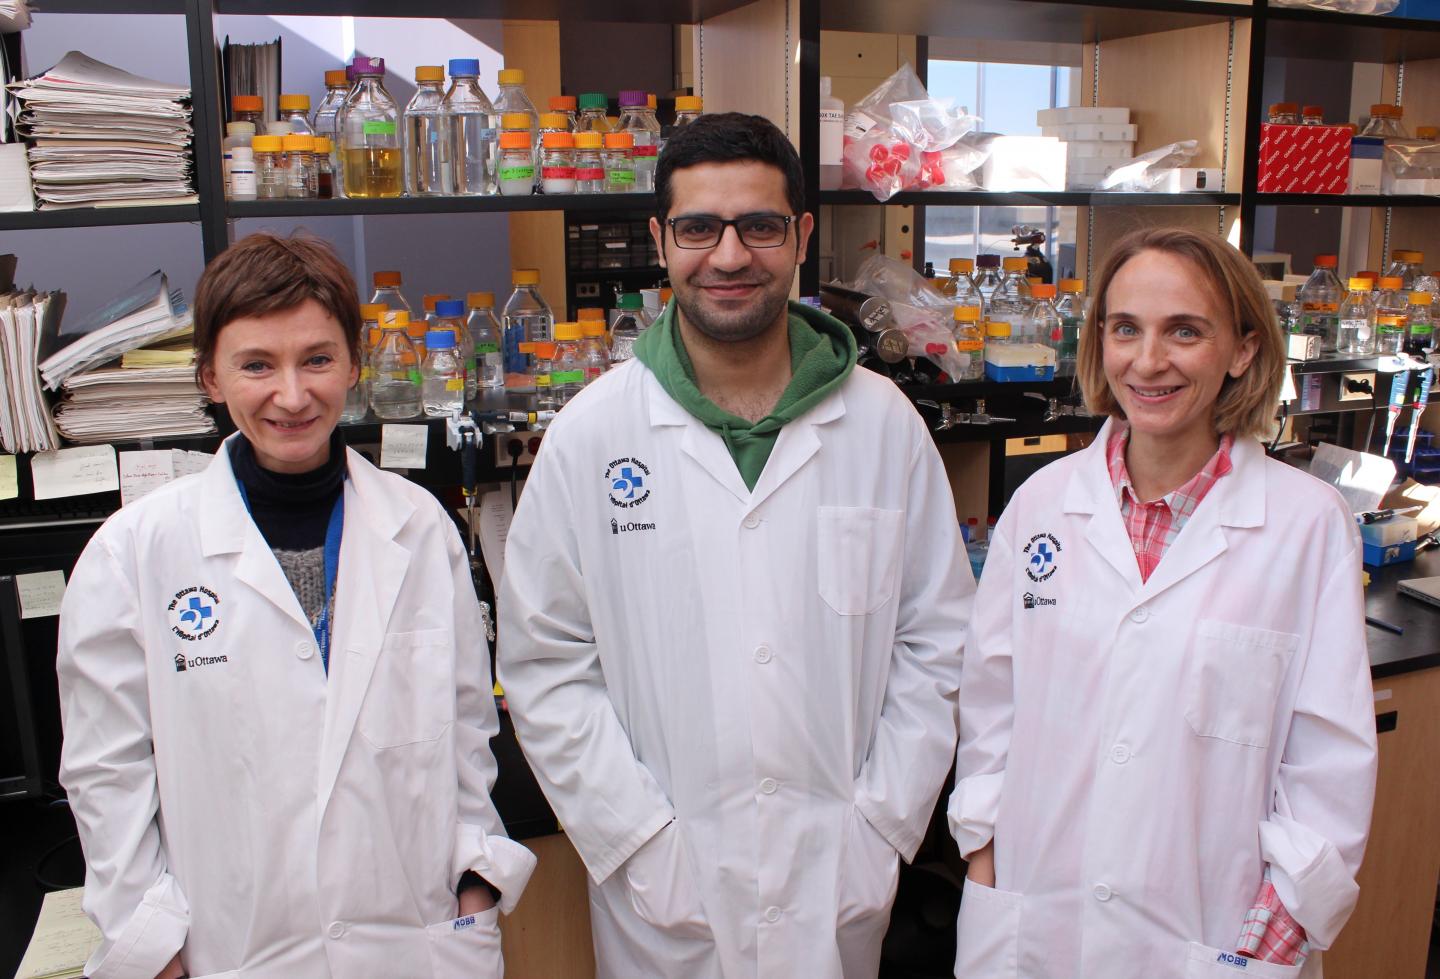 The Research Team Includes Dr. Carmen Palii, Dr. Aissa Benyoucef and Dr. Marjorie Brand